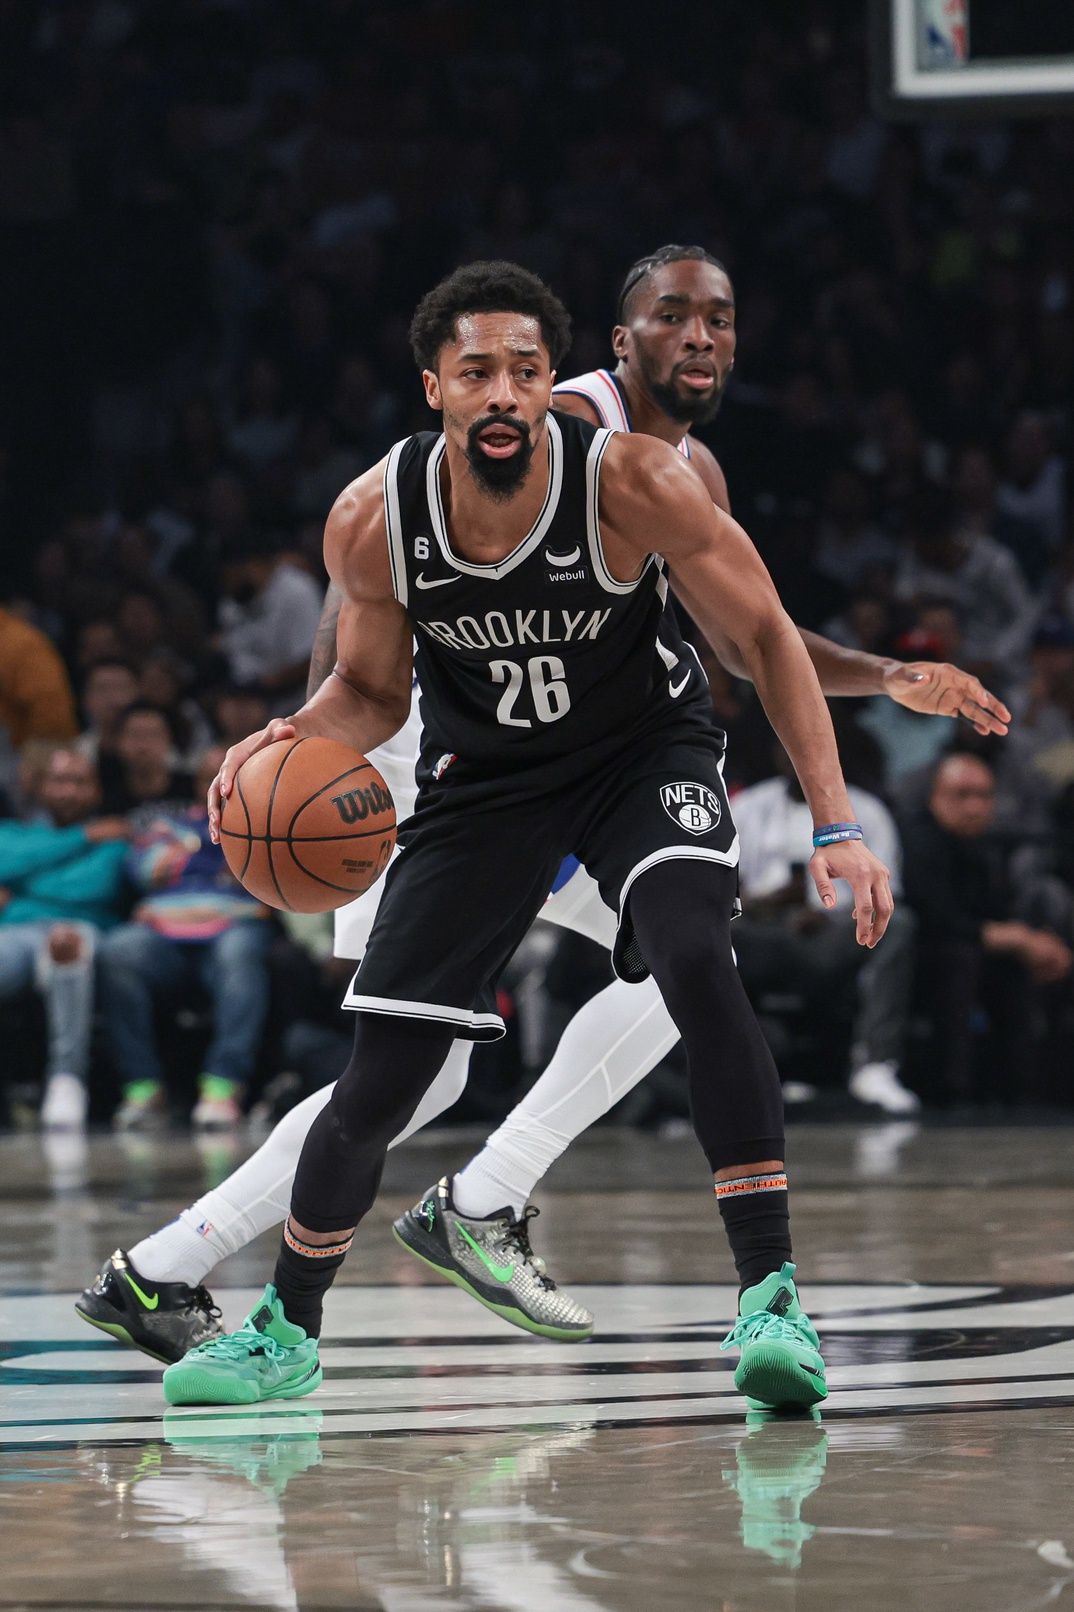 Apr 22, 2023; Brooklyn, New York, USA; Nets guard Spencer Dinwiddie (26) dribbles in front of Philadelphia 76ers guard Shake Milton (18) during the second quarter of game four of the 2023 NBA playoffs at Barclays Center. Mandatory Credit: Vincent Carchietta-USA TODAY Sports